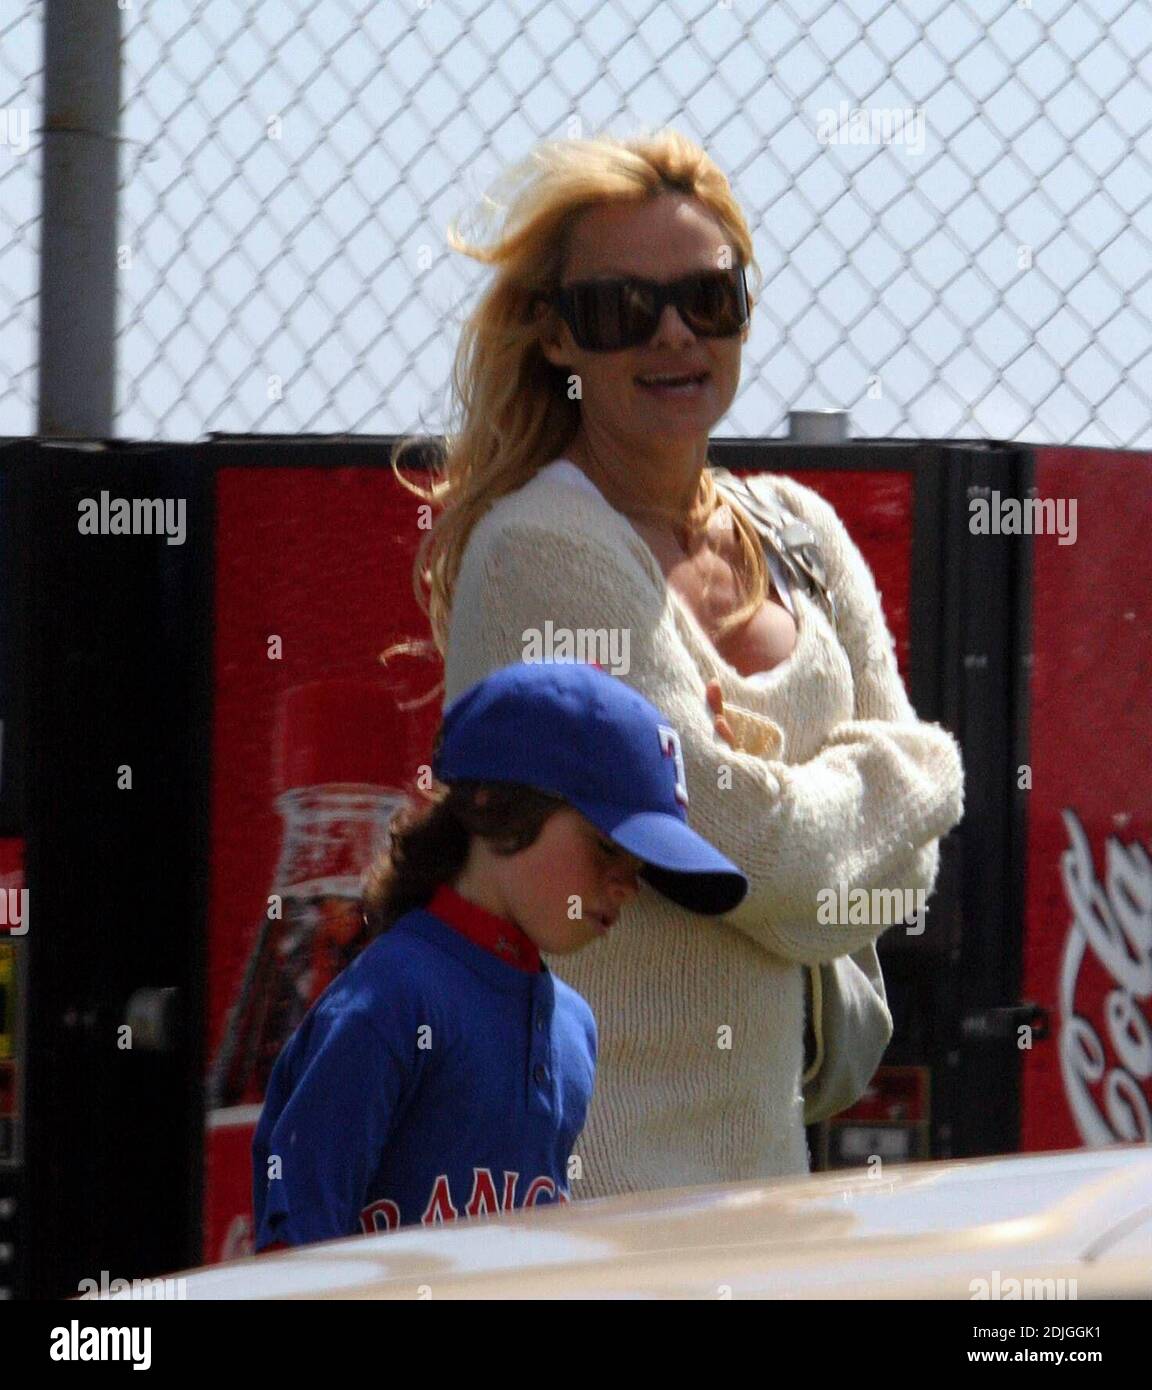 Exclusive!! Pamela Anderson appears to have an aching back. The ex Baywatch beauty known for her ample assets,  was stretching as she waited for her sons to finish playing sports in Malibu, Ca. 03/18/06 Stock Photo